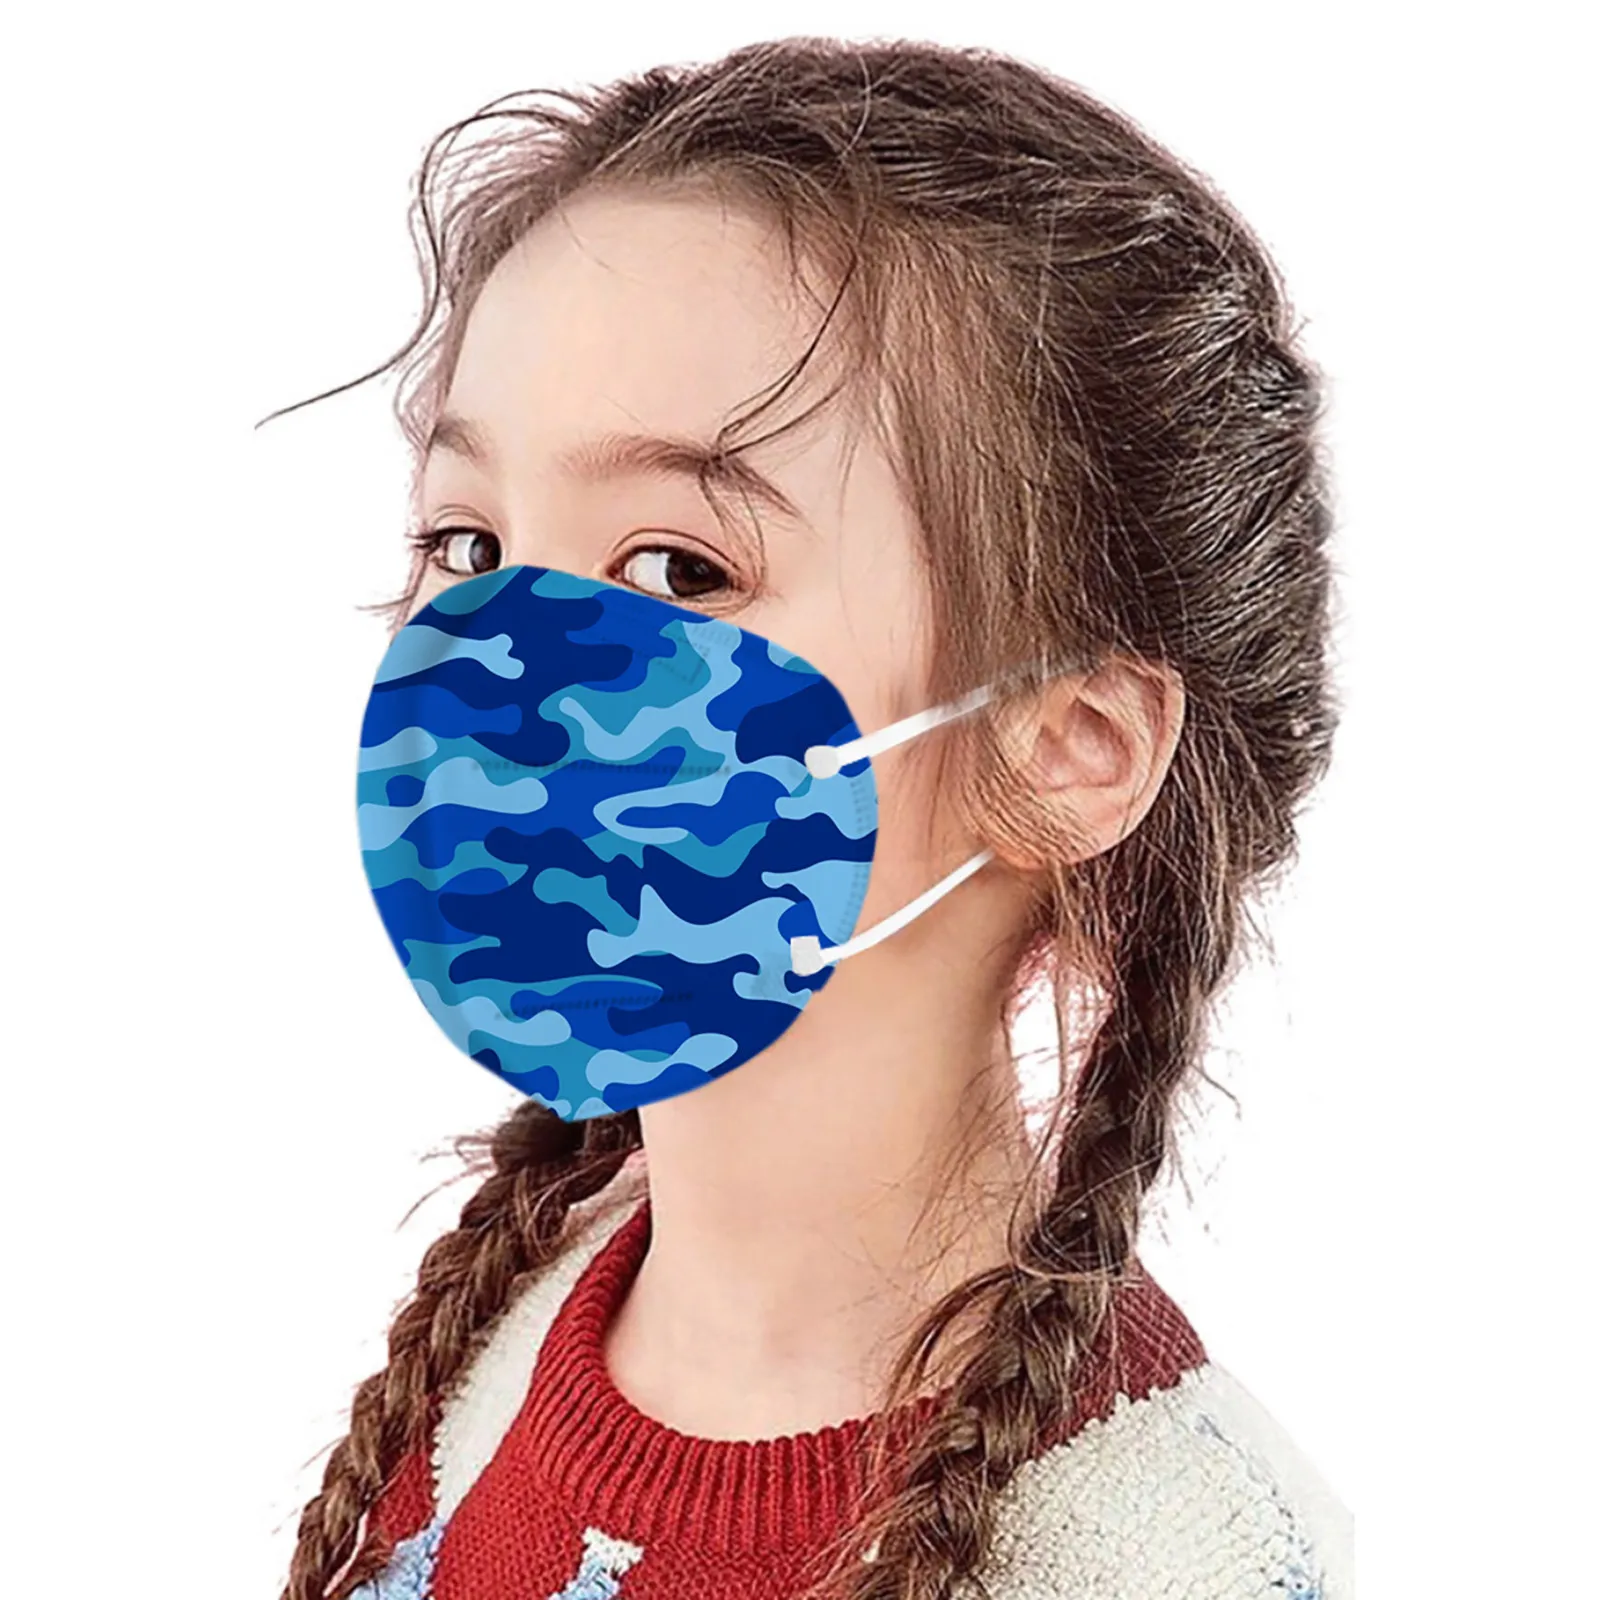 

5-Layer High-Density Mask PM2.5 Wind And Mist Pollution Protection Filter blue camouflage print mask Fish mascarilla MASK